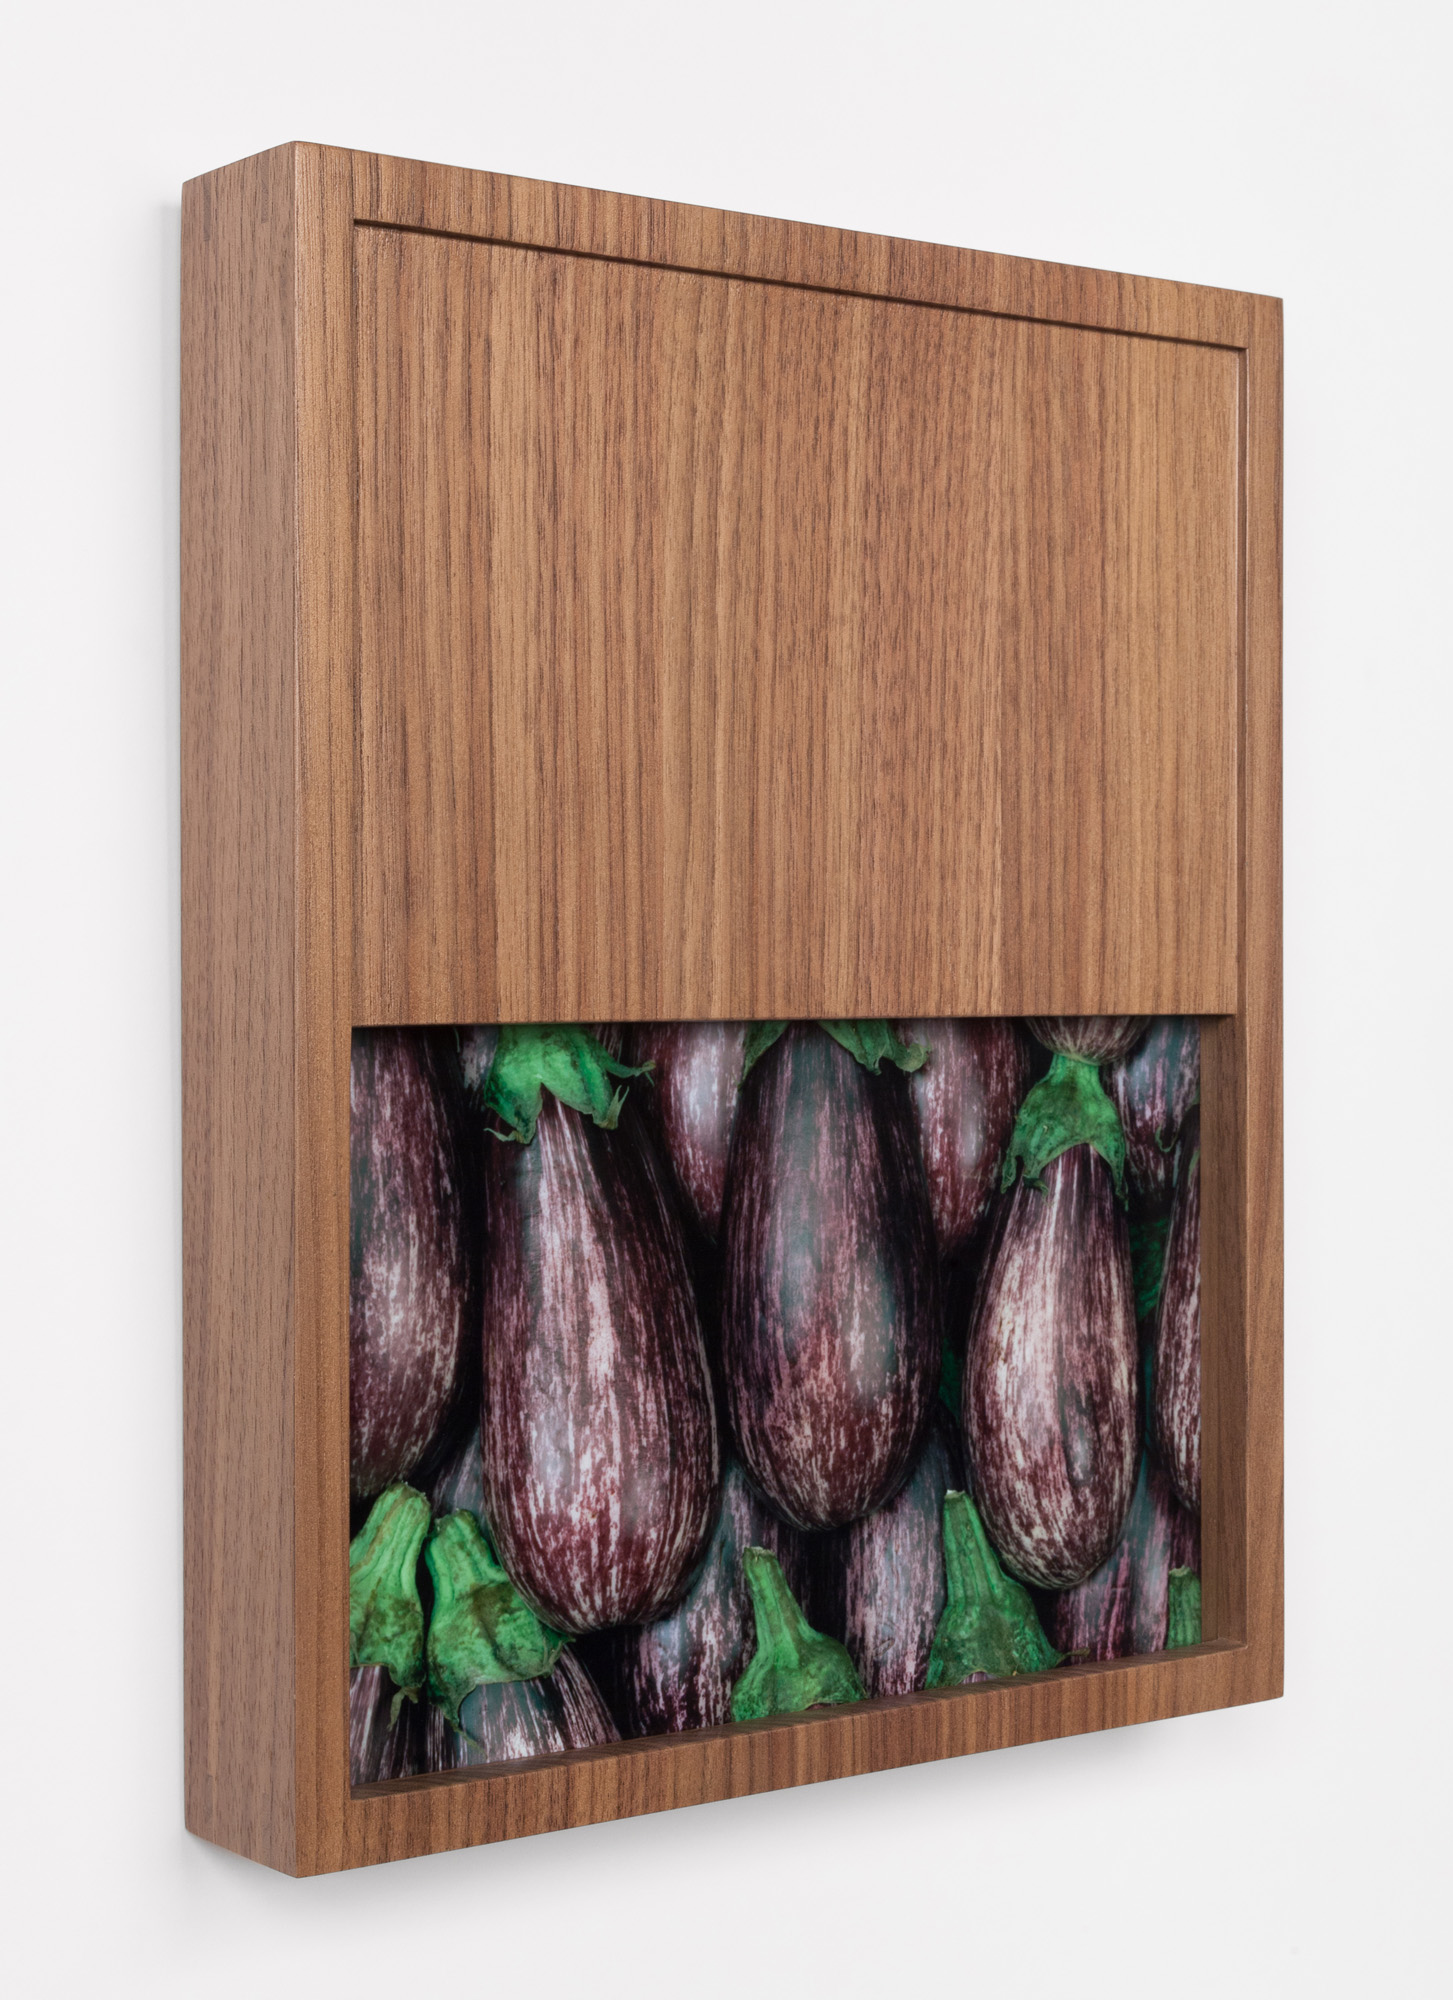  Alex Kisilevich  Eggplants , 2016 C-print mounted to stonehenge gator, modified wooden frame, 13" x 10.75" x 2" Signed edition of 5 + AP    